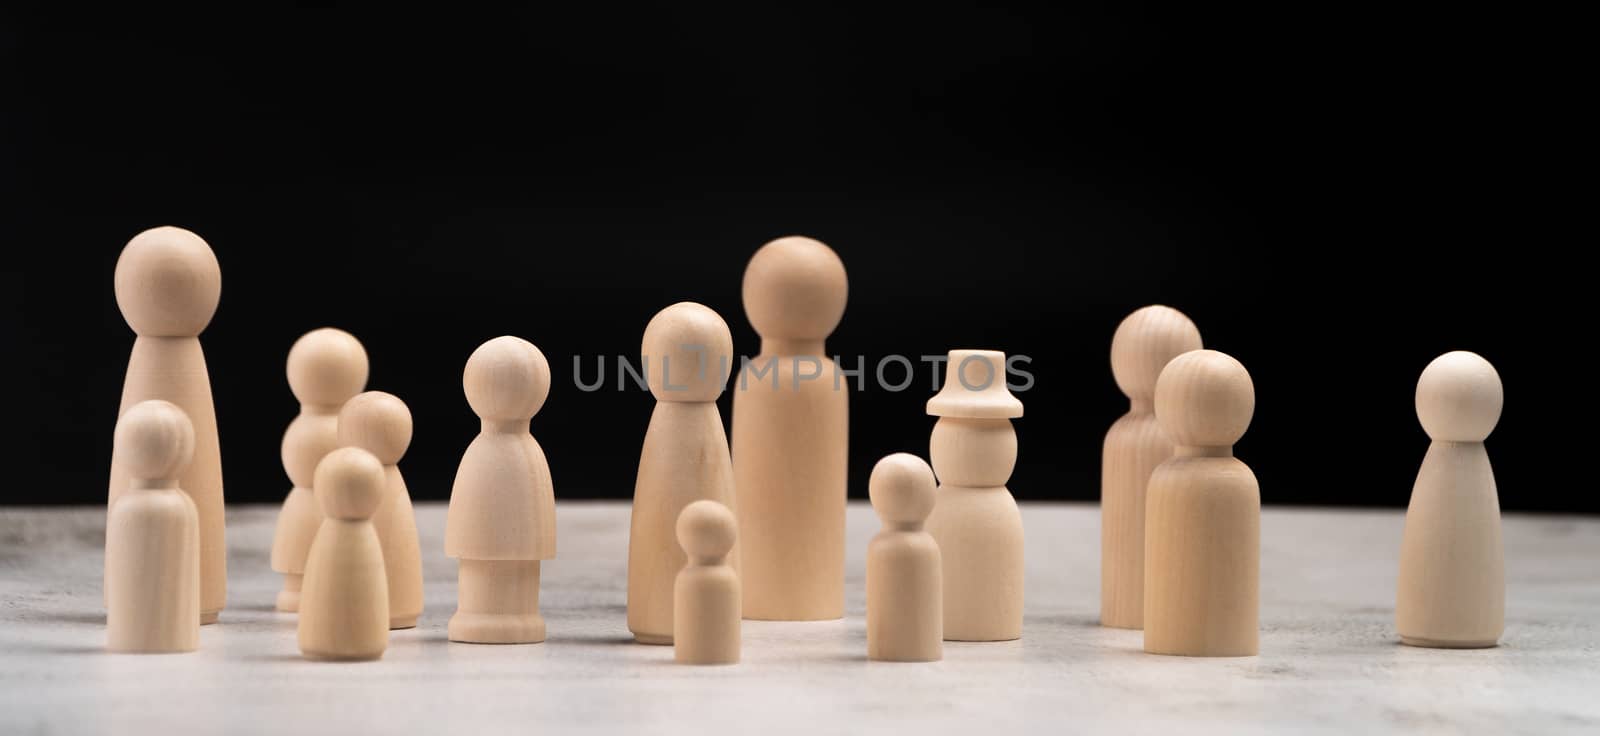 Many wooden human figures, Man and woman standing. Concept of Human resource, Talent management, Recruitment employee